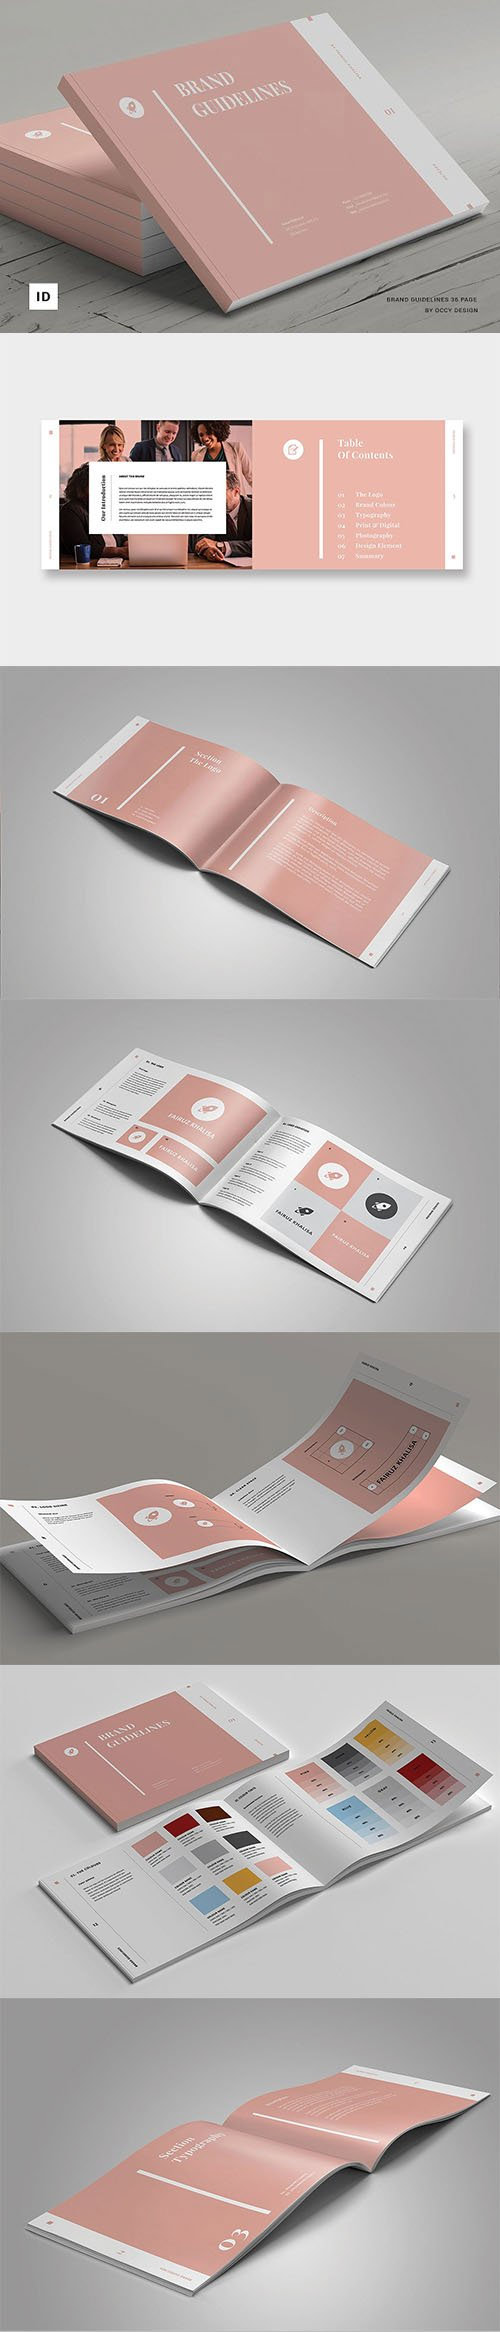 Brand Guidelines 2968685